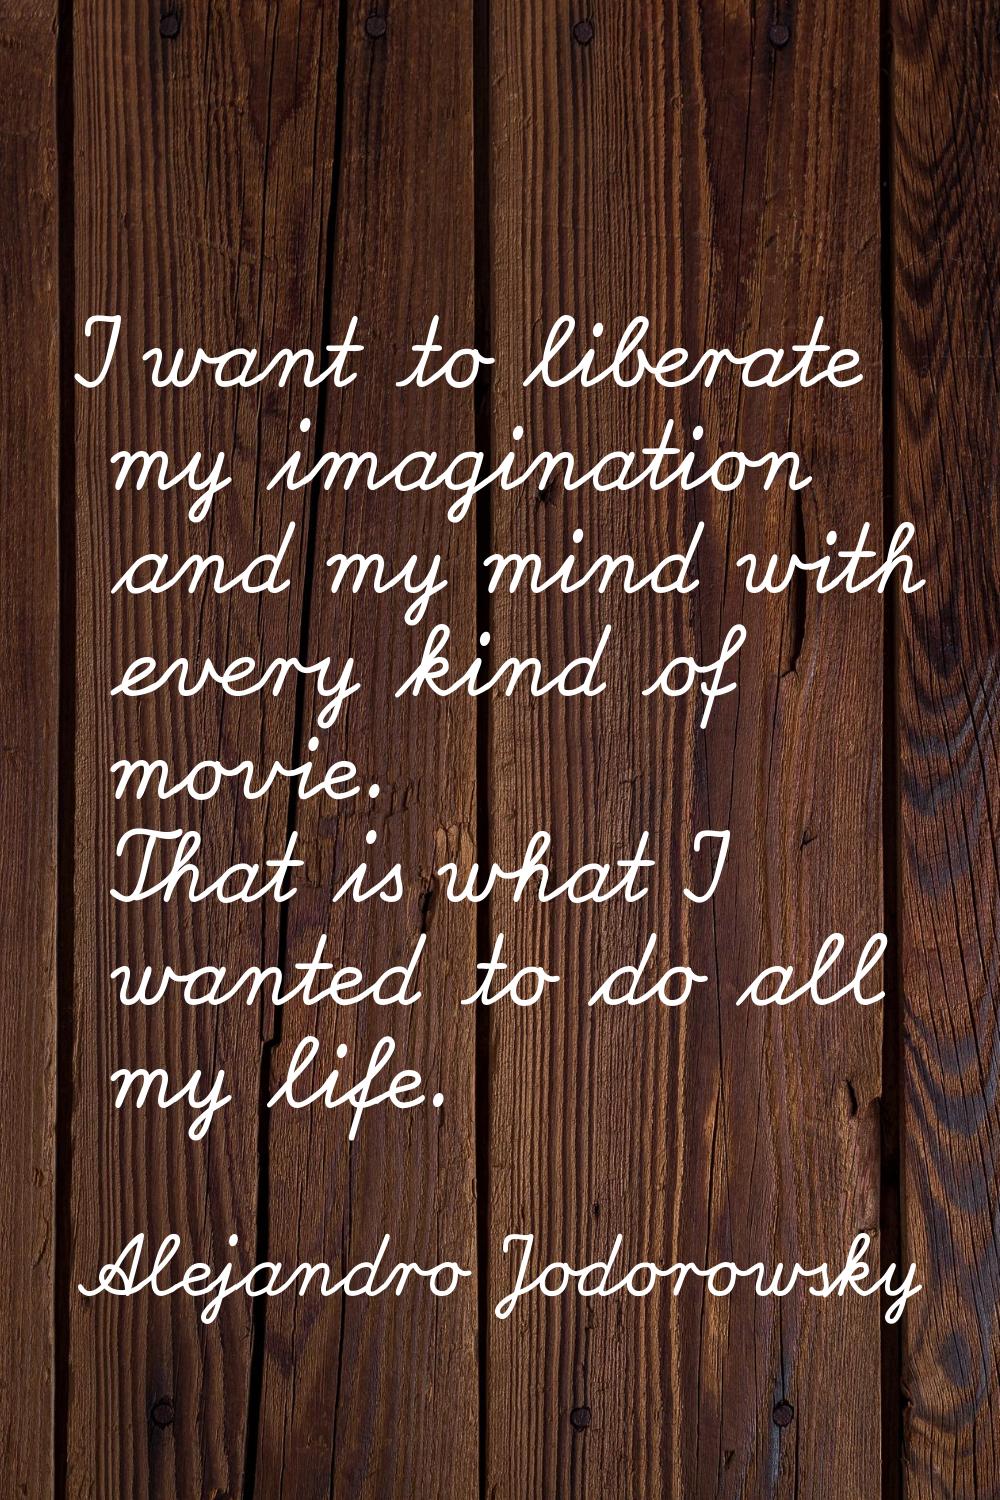 I want to liberate my imagination and my mind with every kind of movie. That is what I wanted to do